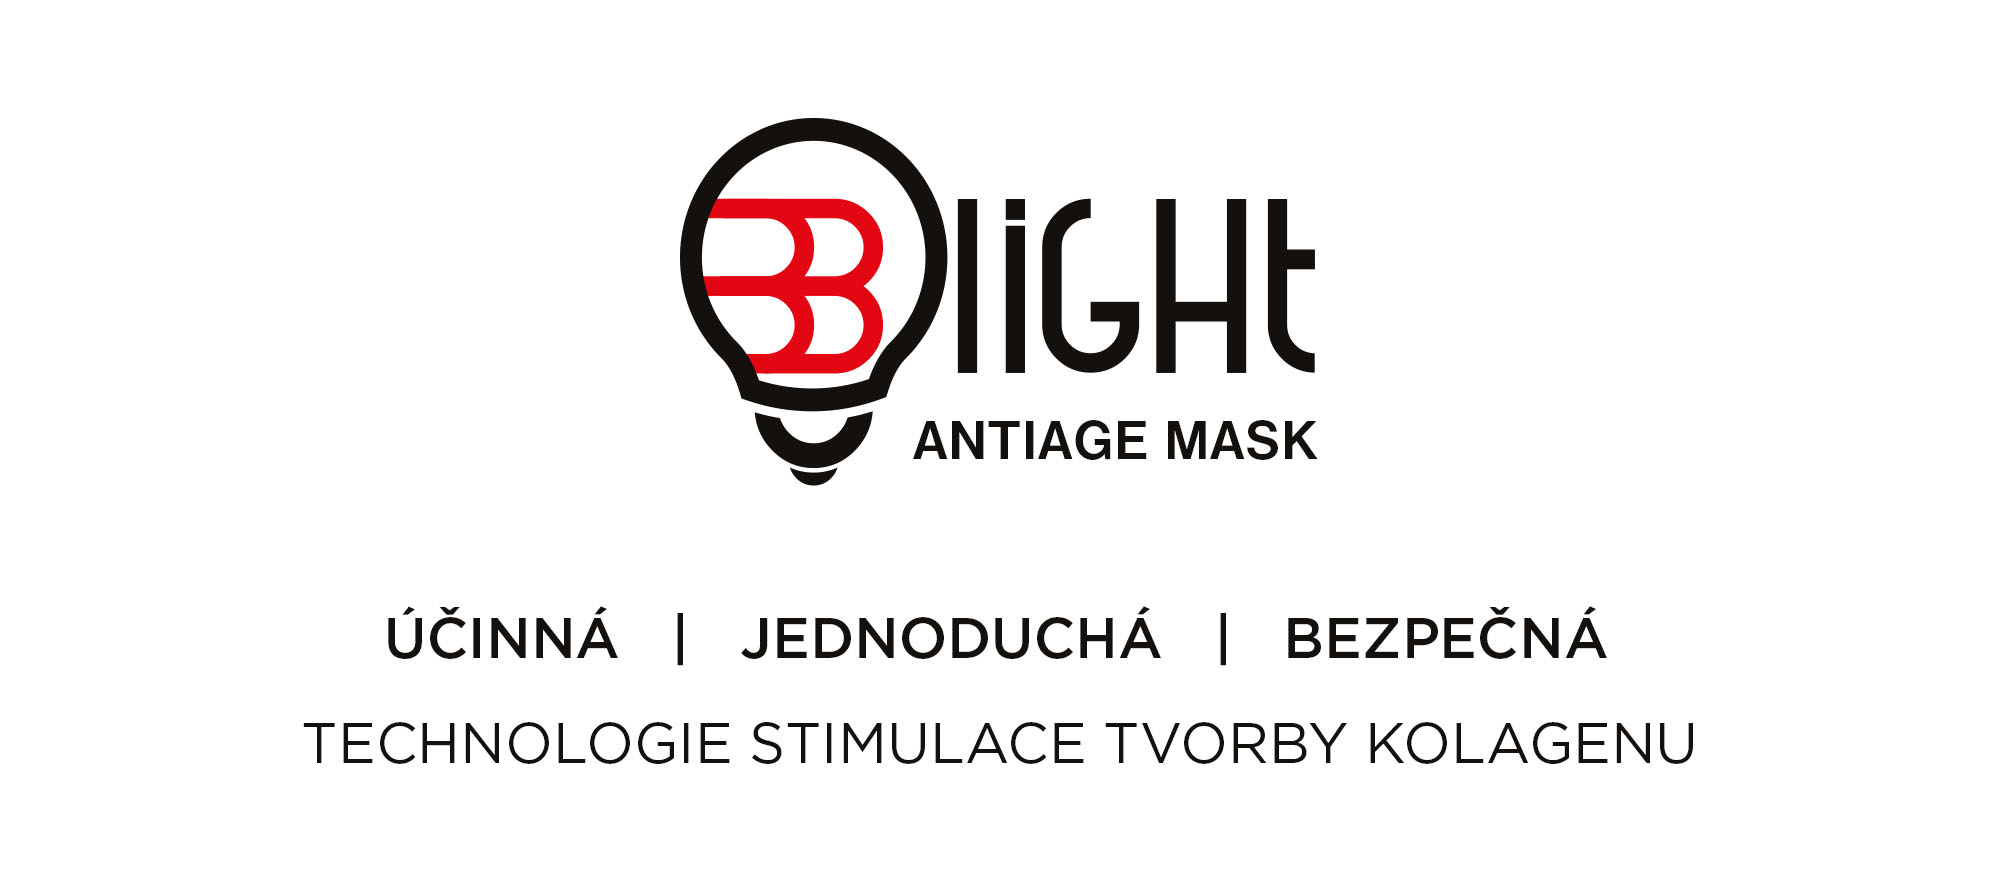 Blight antiage mask